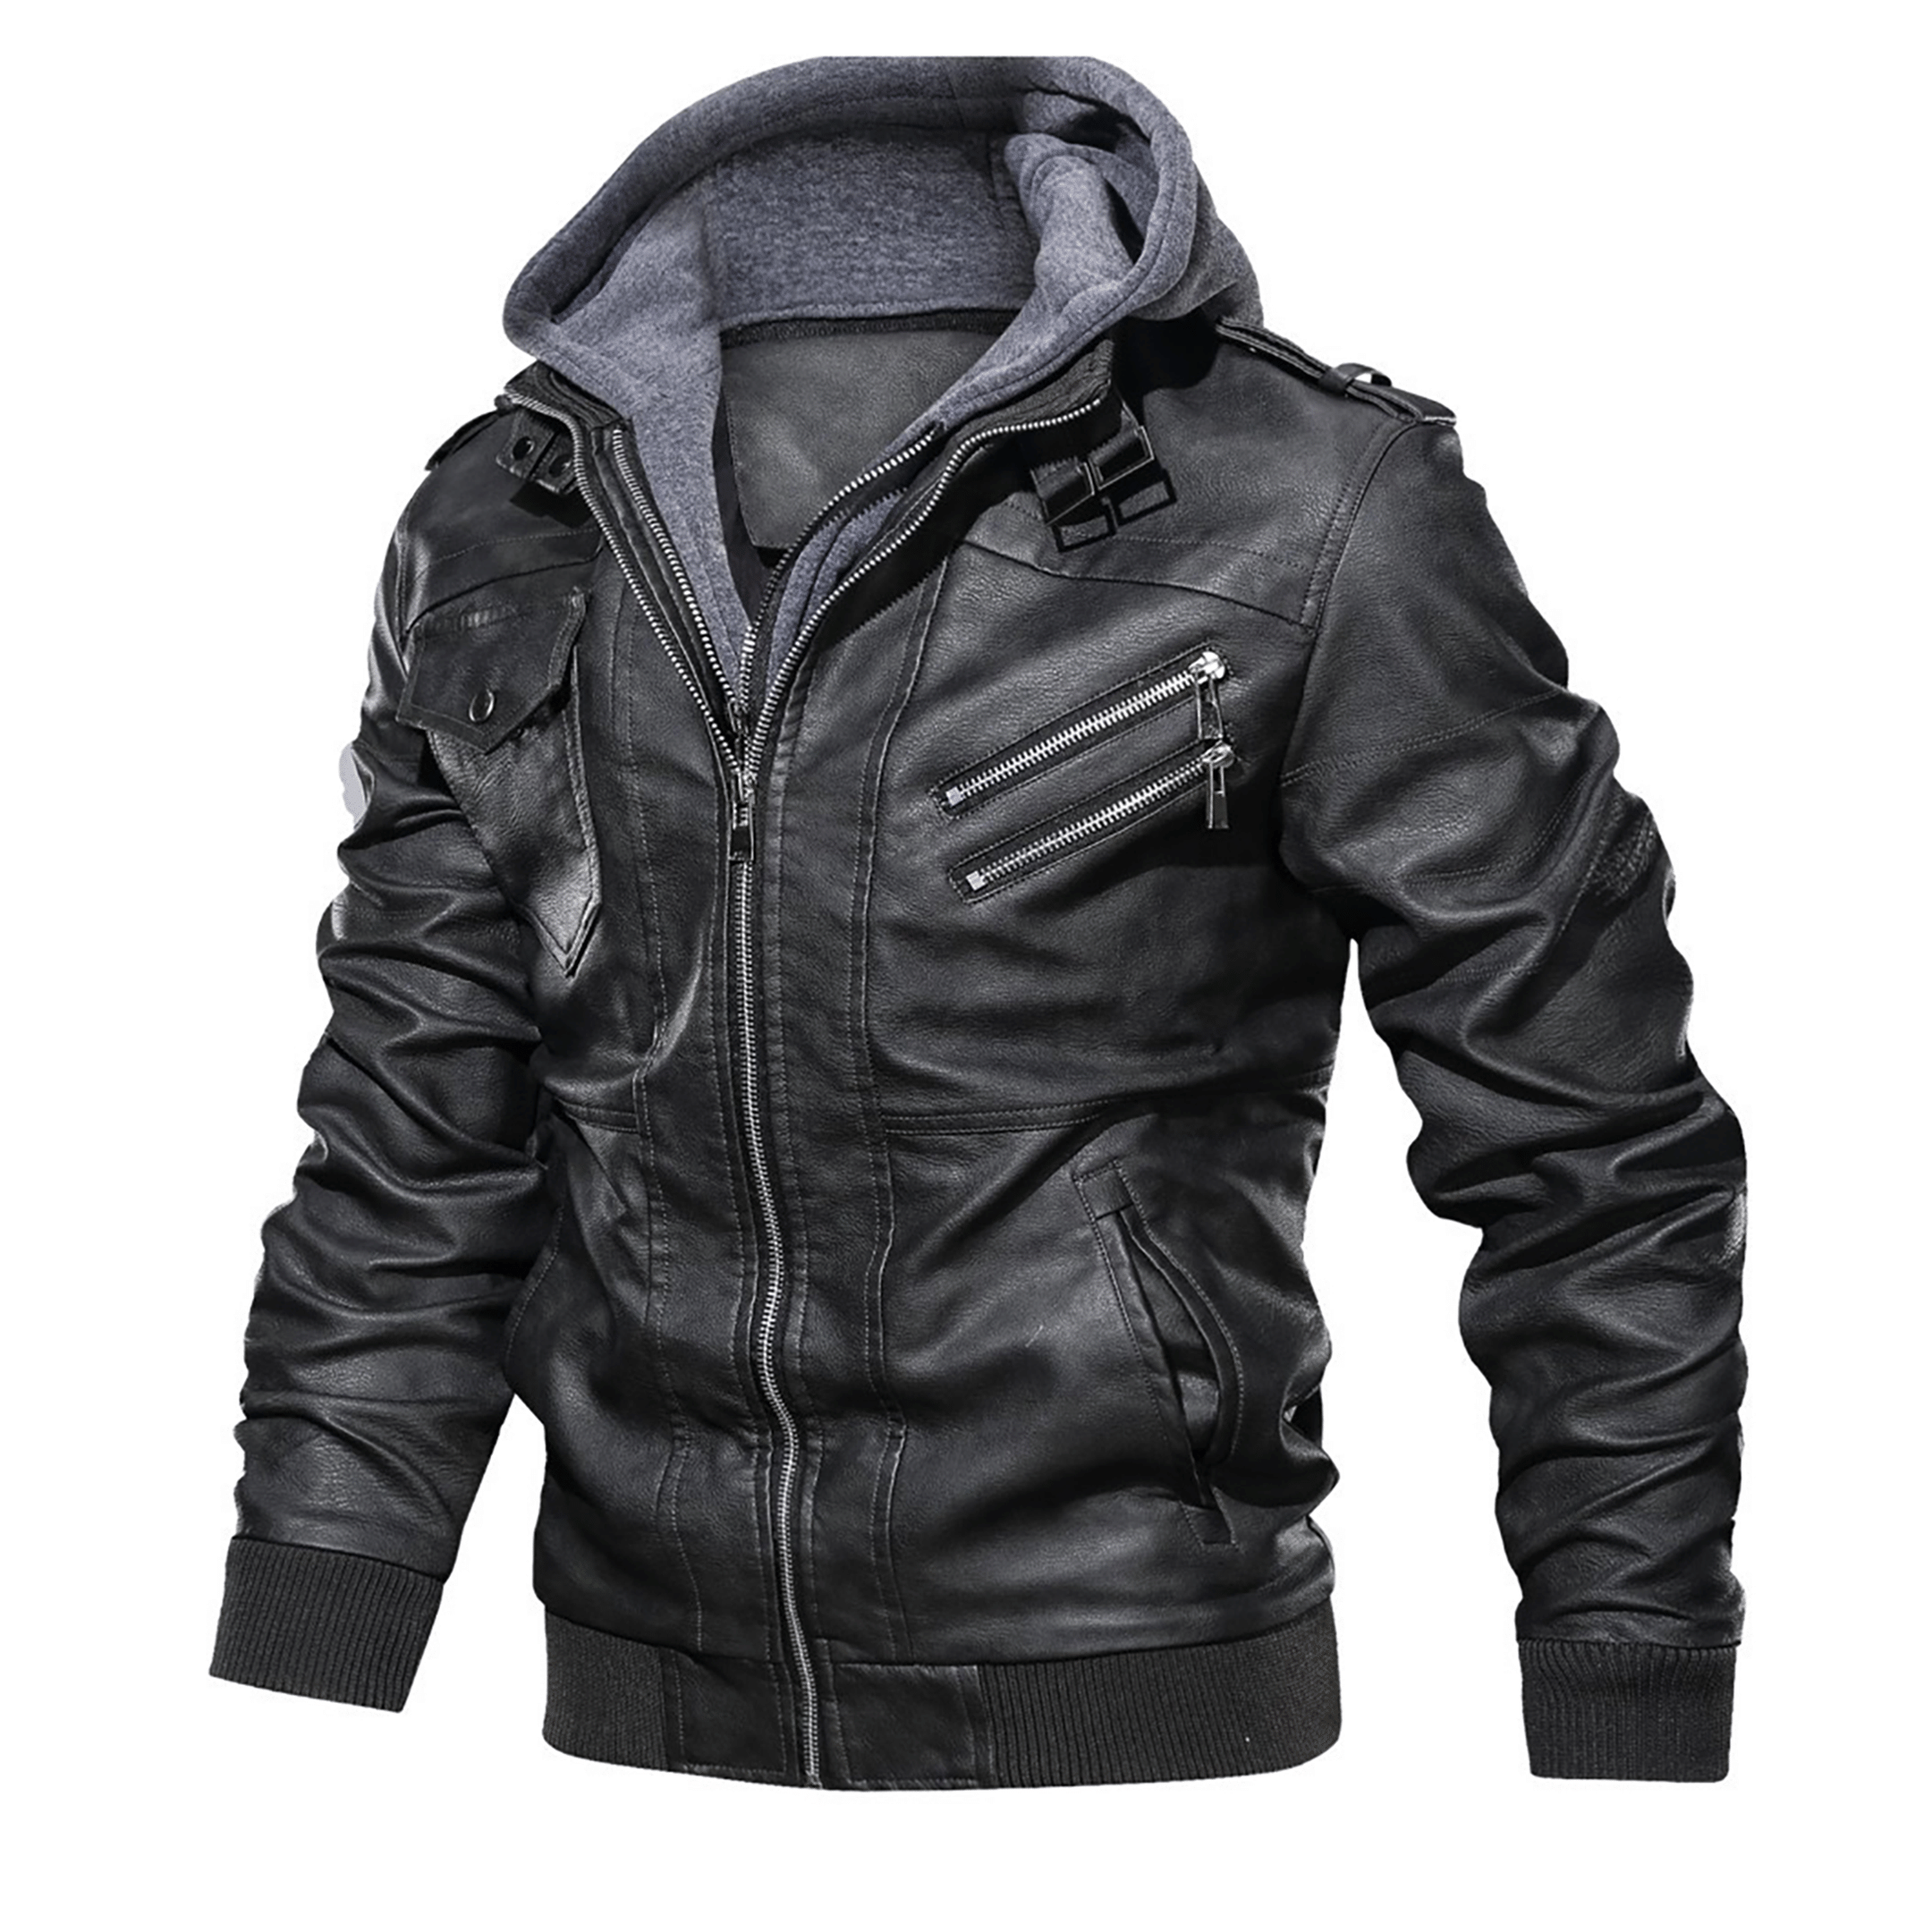 Top leather jackets and latest products 373